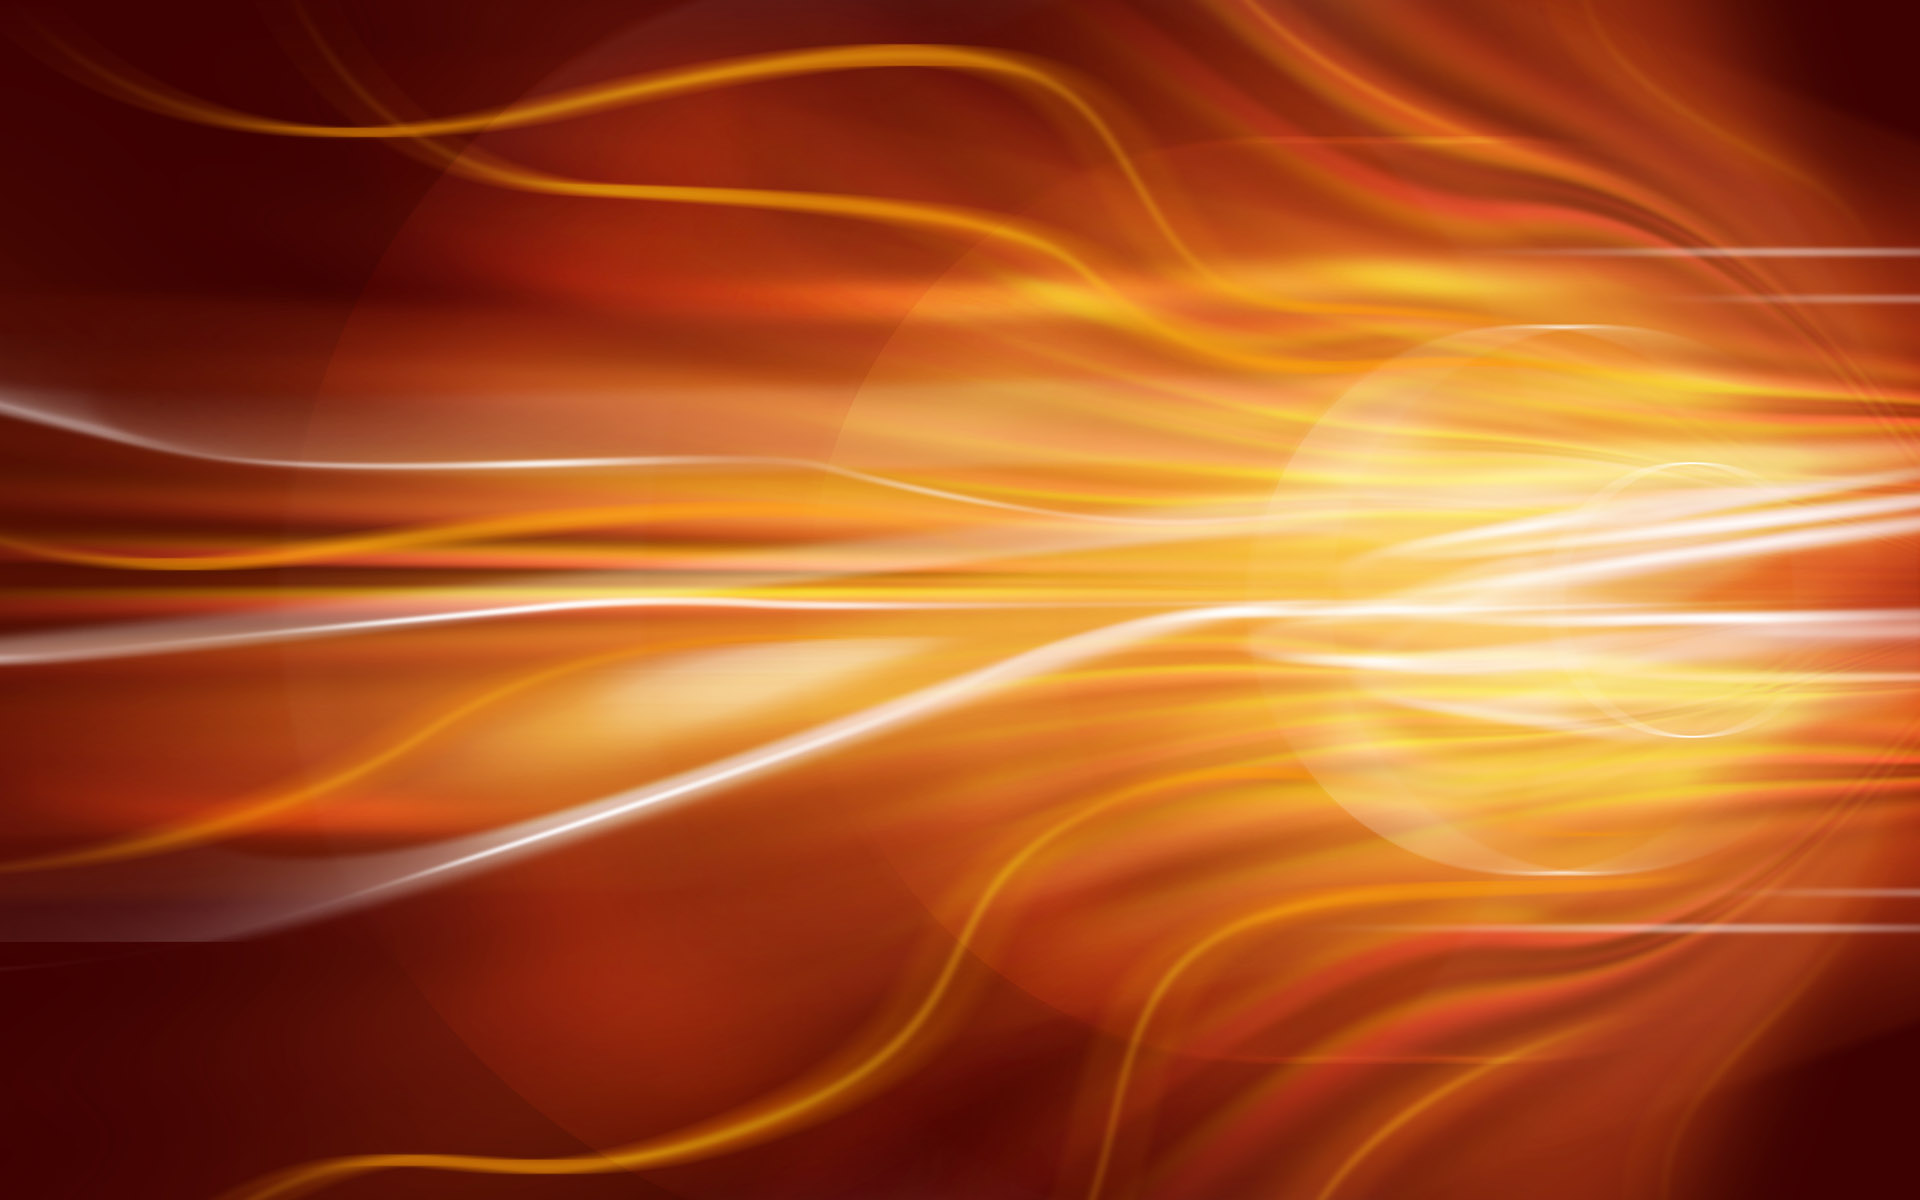 Yellow And Red Flames Sun Tapetky Cz Wallpaper